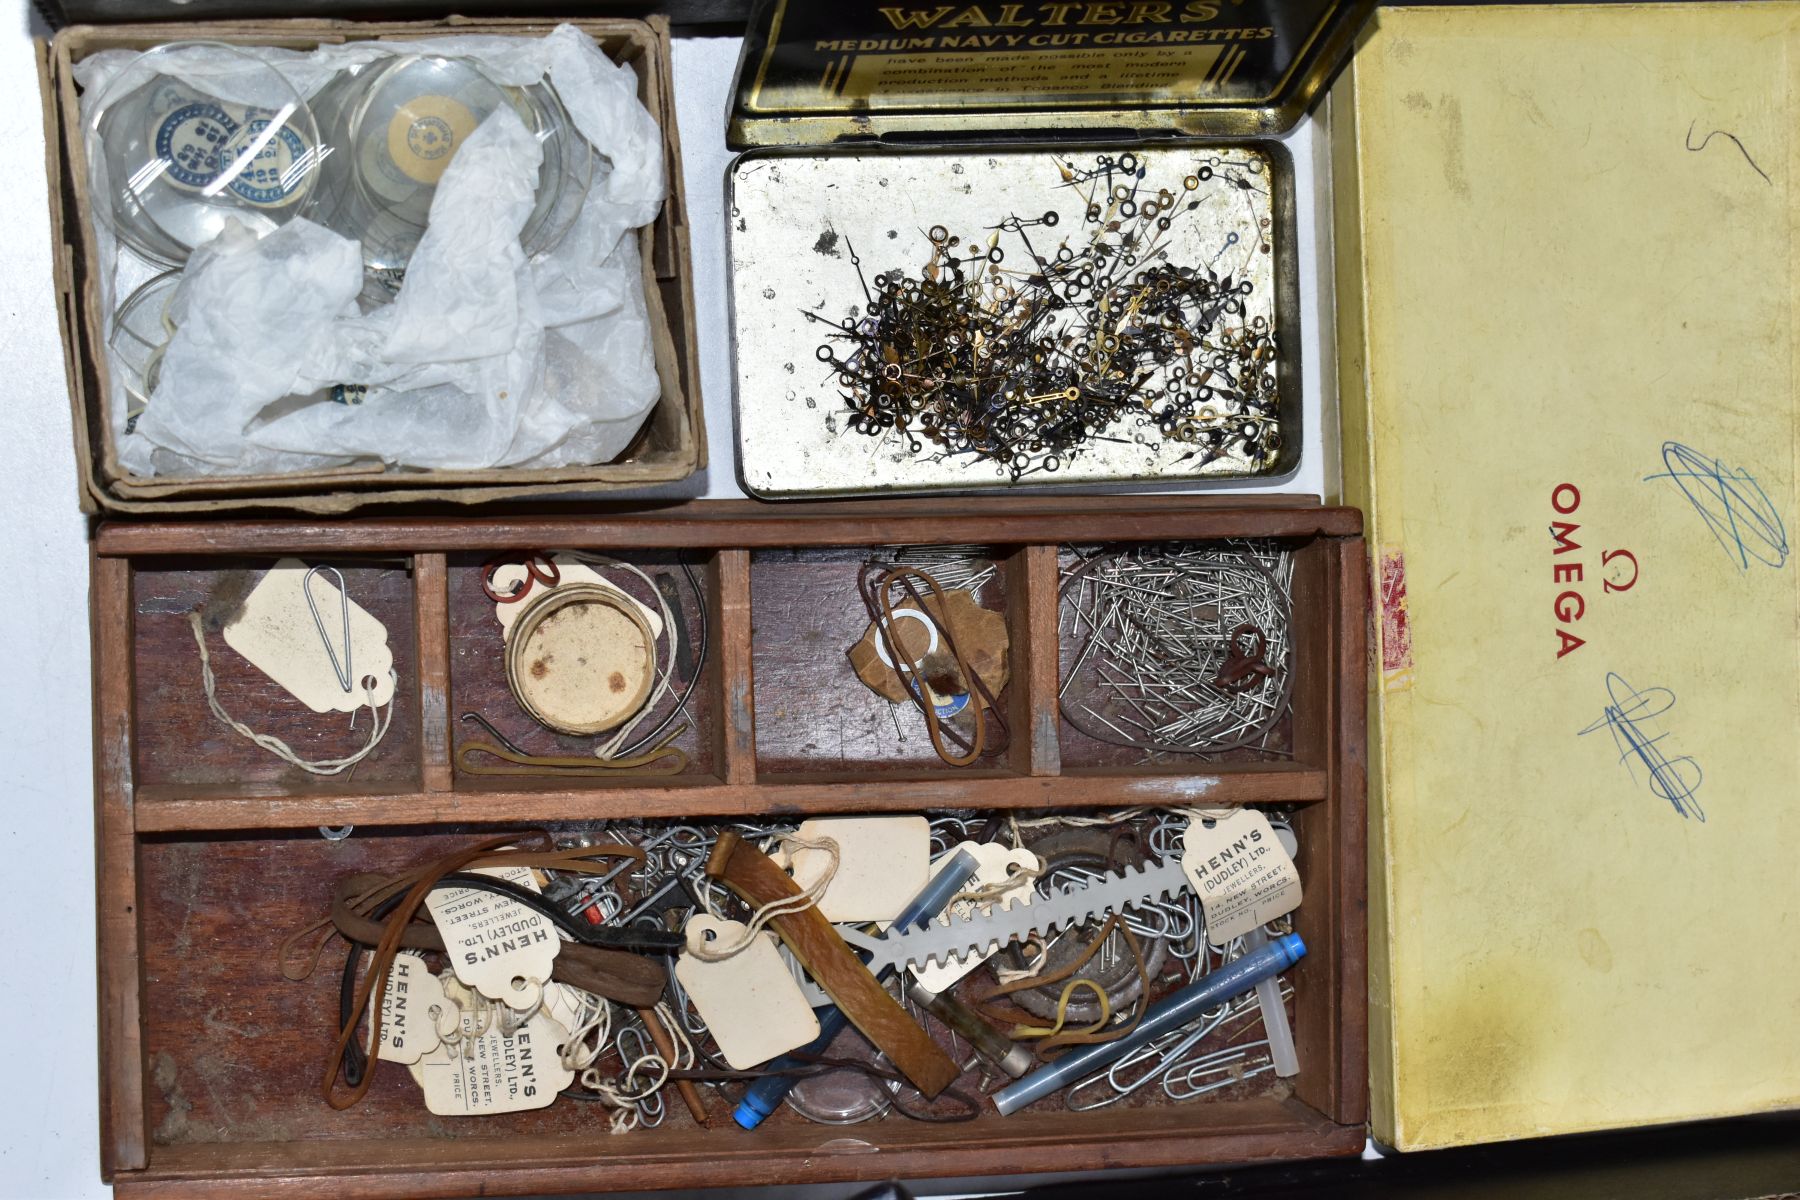 TWO BOXES OF ASSORTED WATCH MAKERS PARTS, GLASSES, COGS, SPRINGS, CROWNS, DECONSTTUCTED WATCH - Image 3 of 30